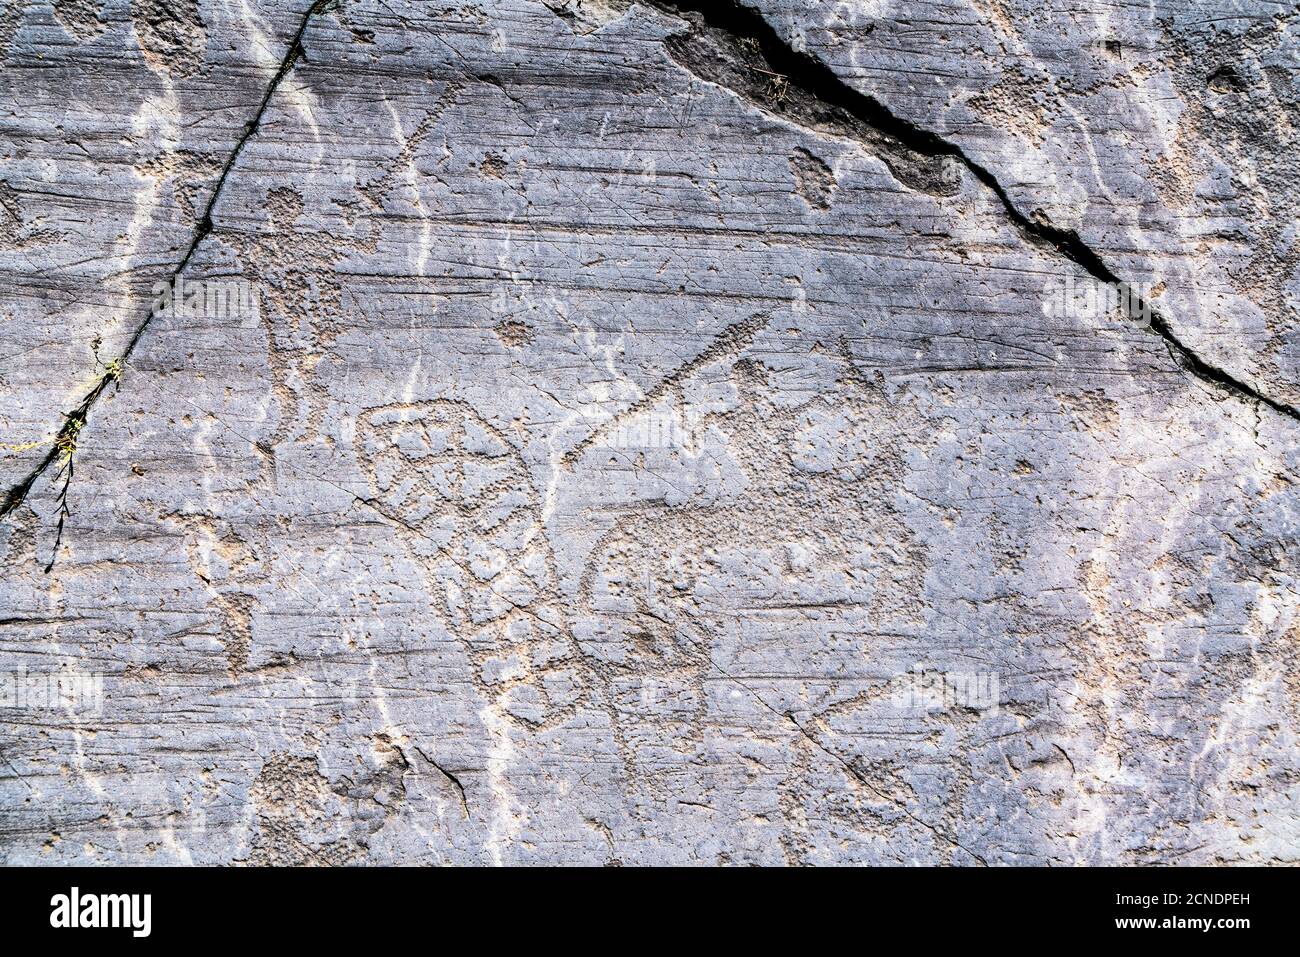 Rock drawing of warrior with spear on horseback, Naquane Park of Rupestrian Engravings, Capo di Ponte, Valcamonica (Val Camonica), Brescia province Stock Photo